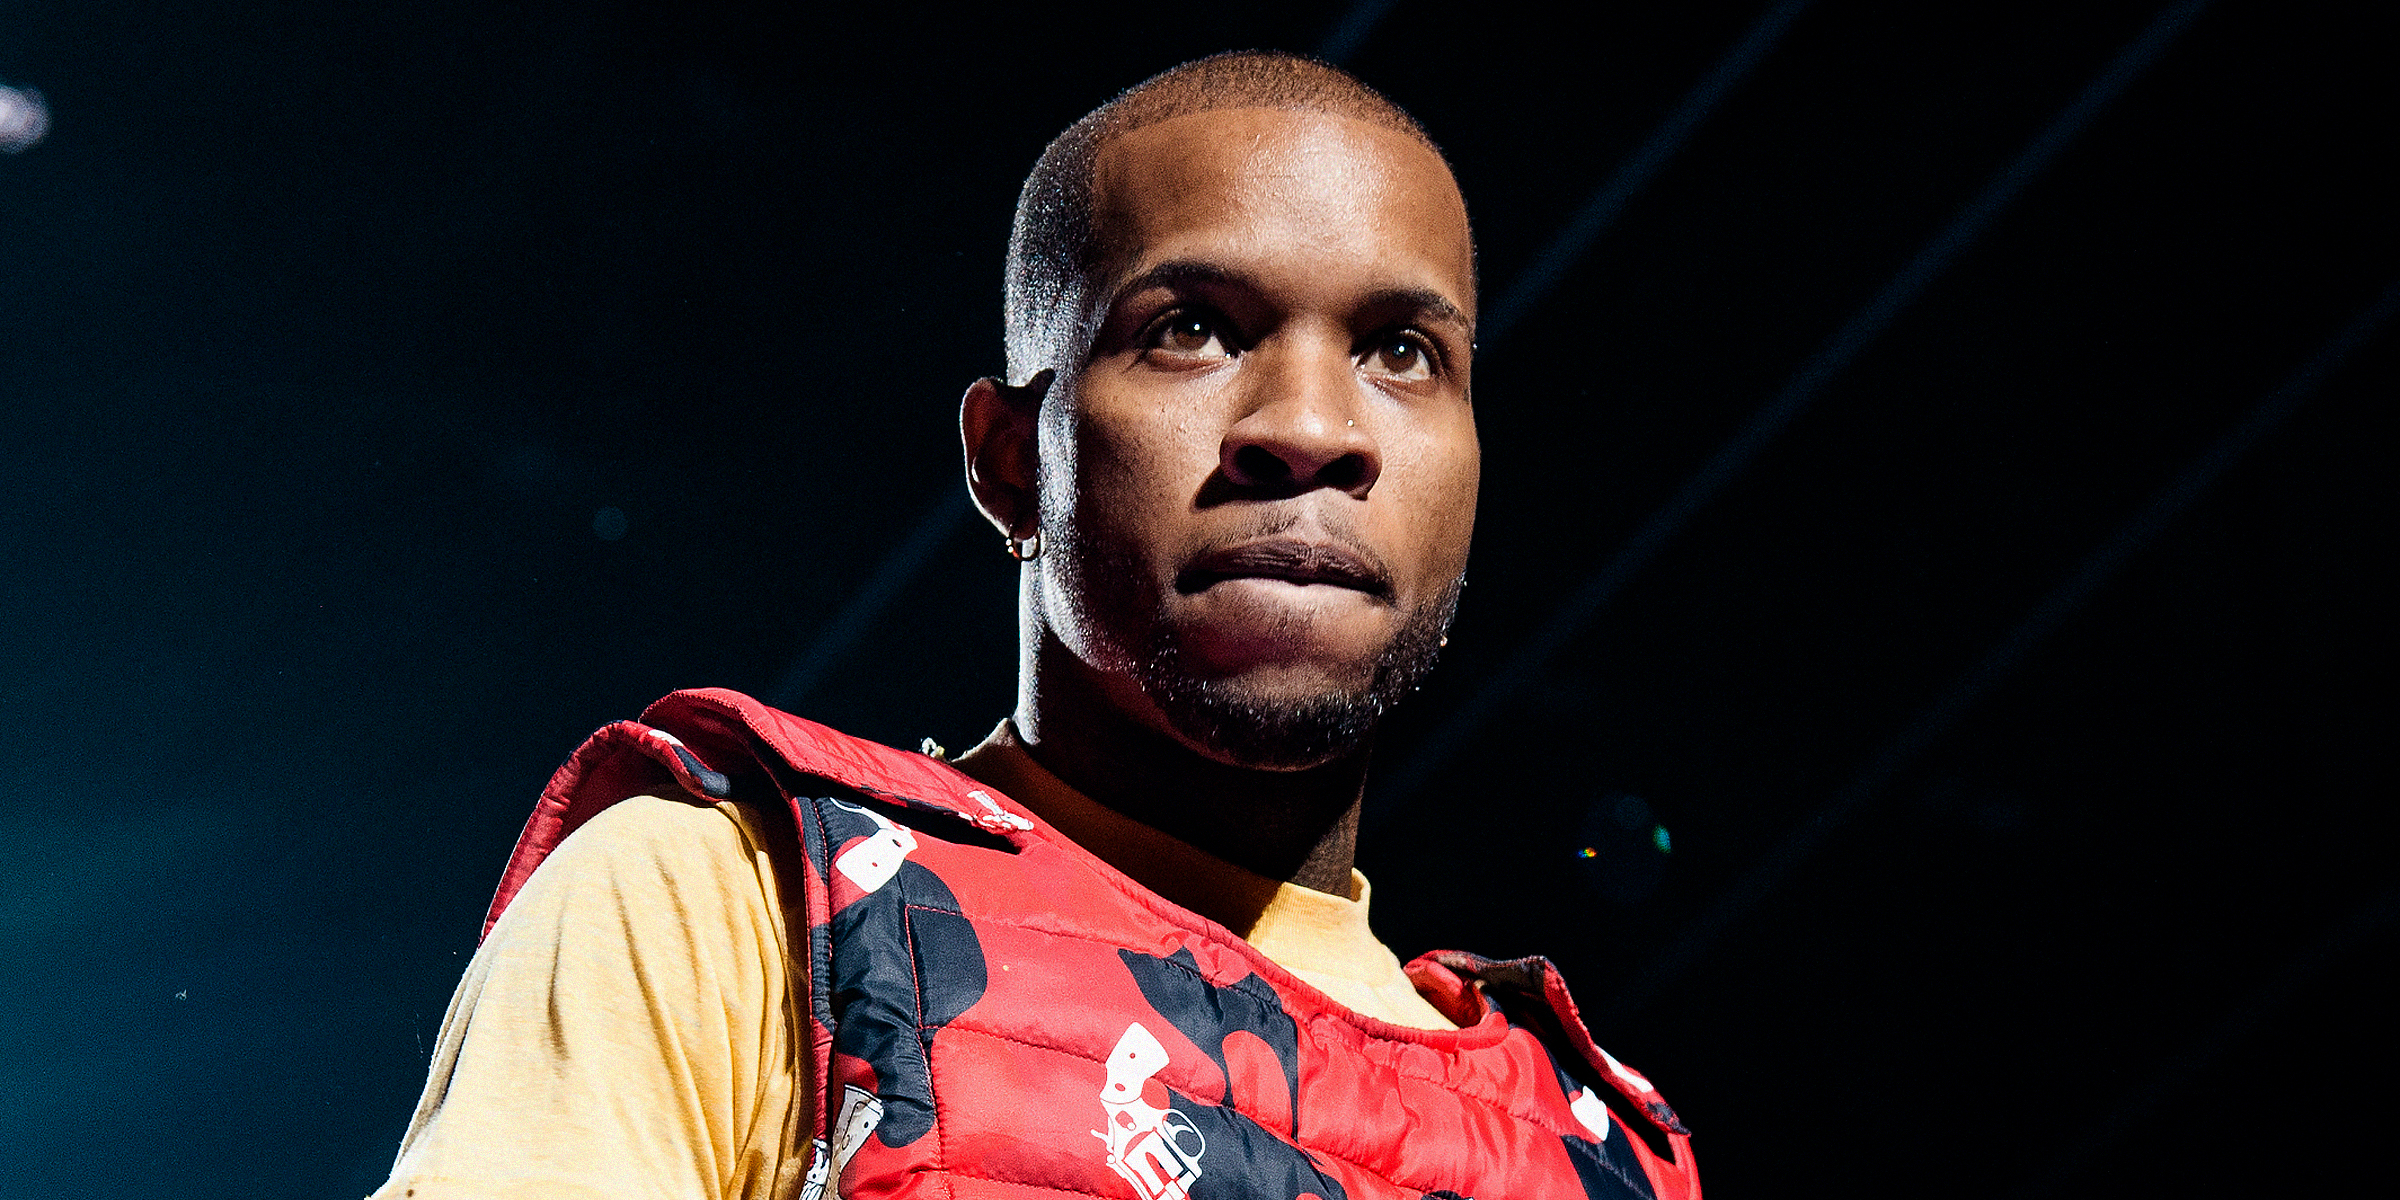 Tory Lanez | Source: Getty Images